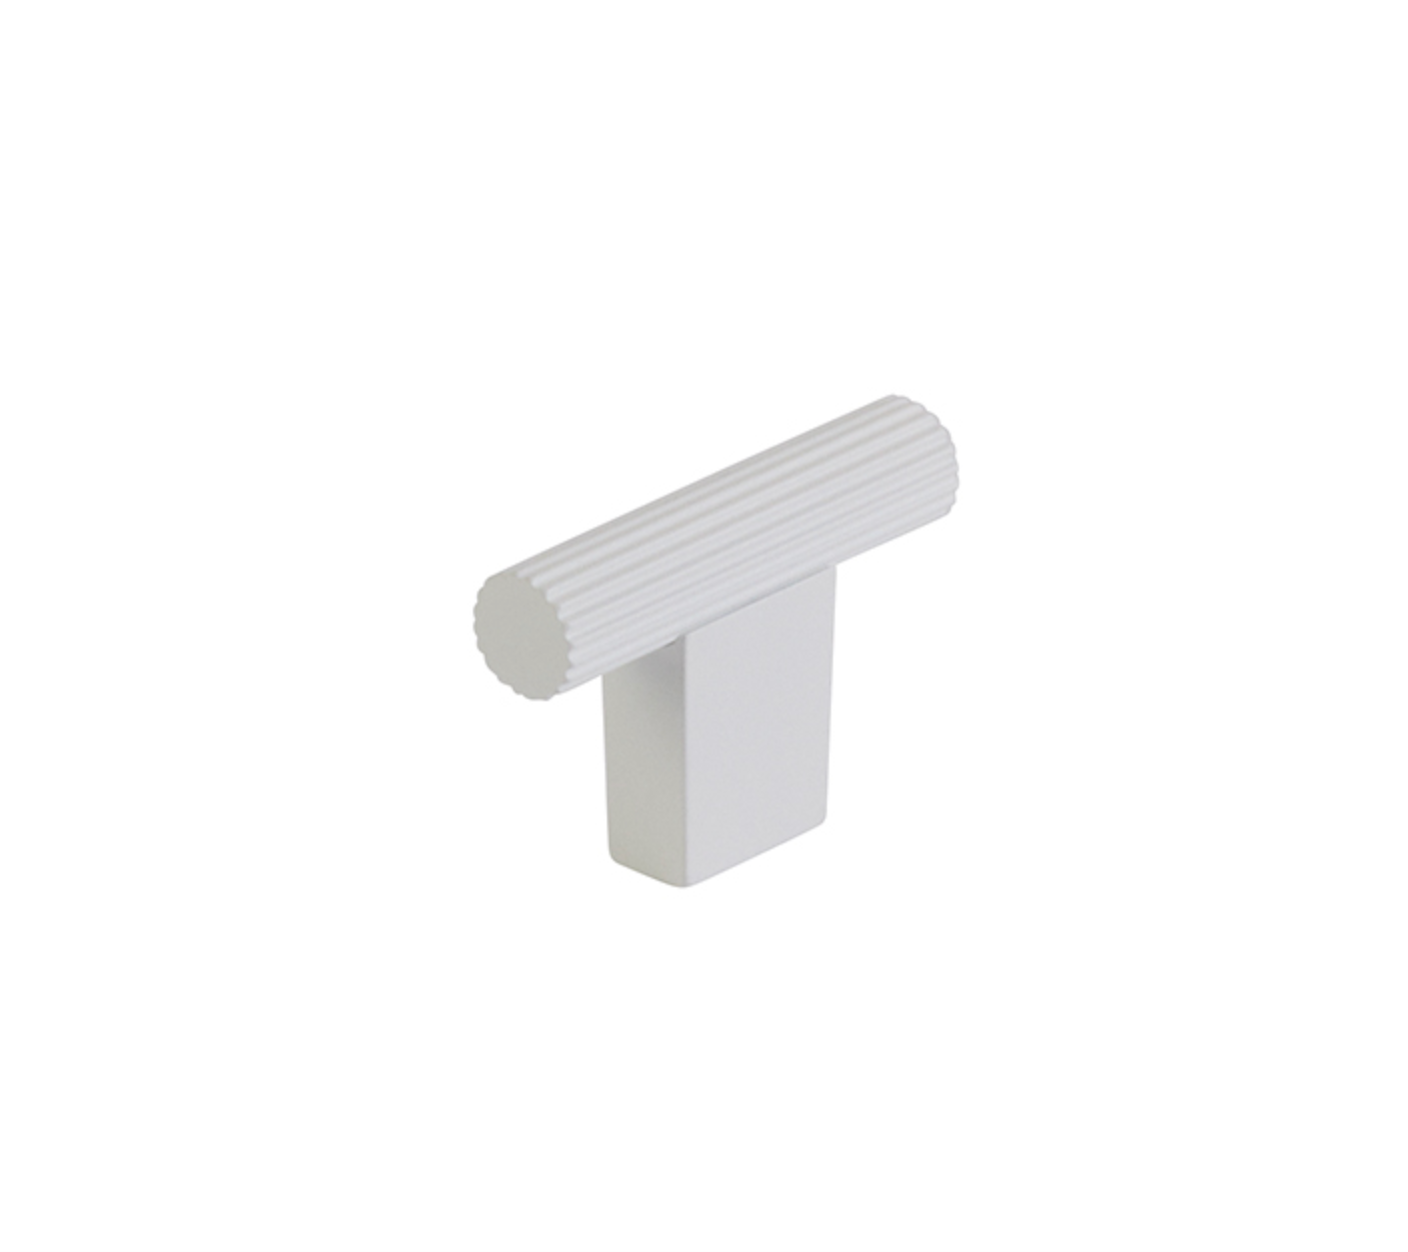 Matte White "Knox" Cabinet Knobs and Drawer Pulls